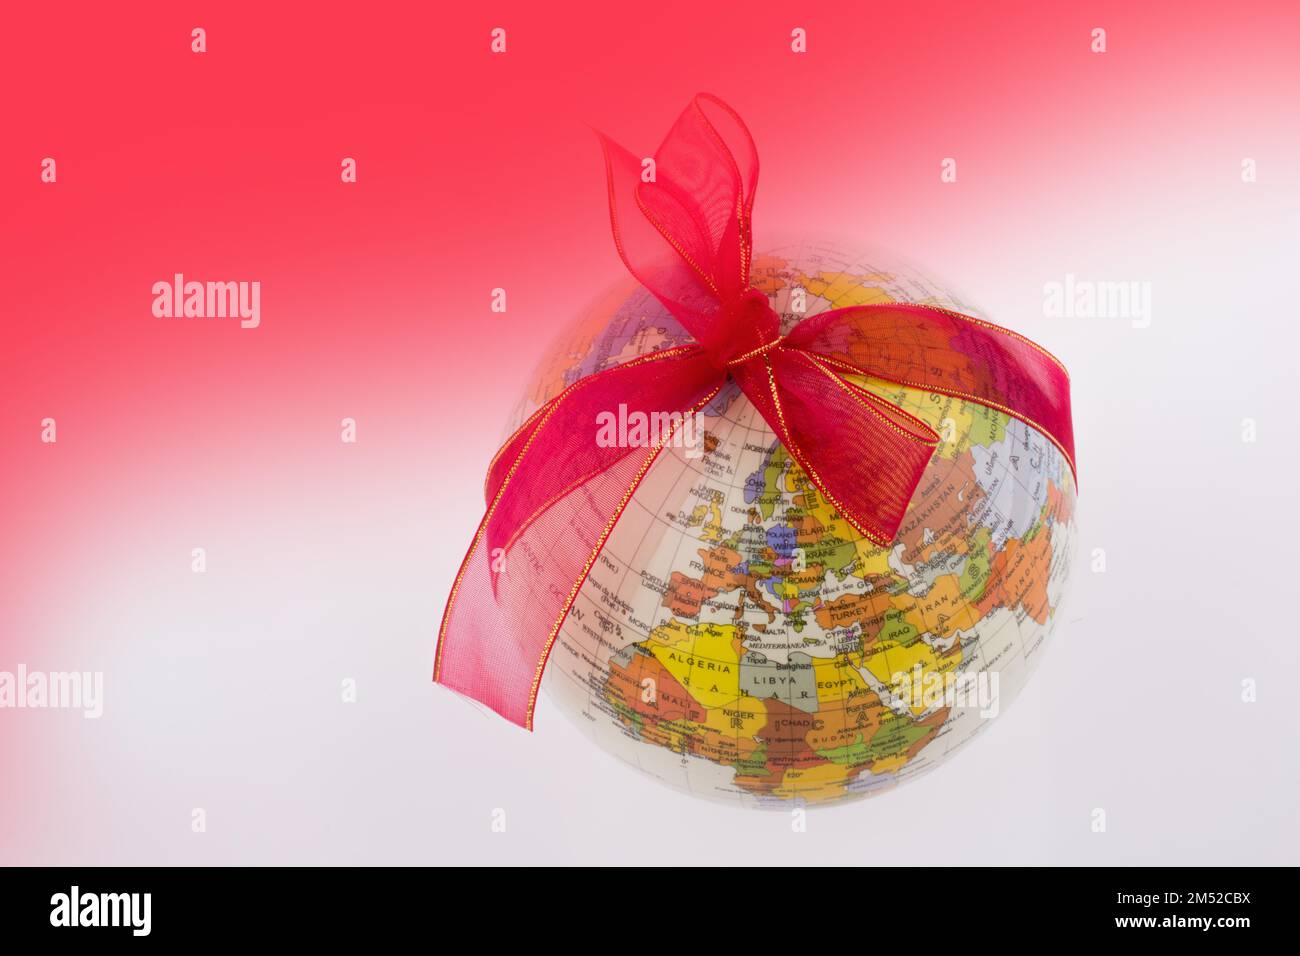 A globe with a ribbon on a red and white background Stock Photo